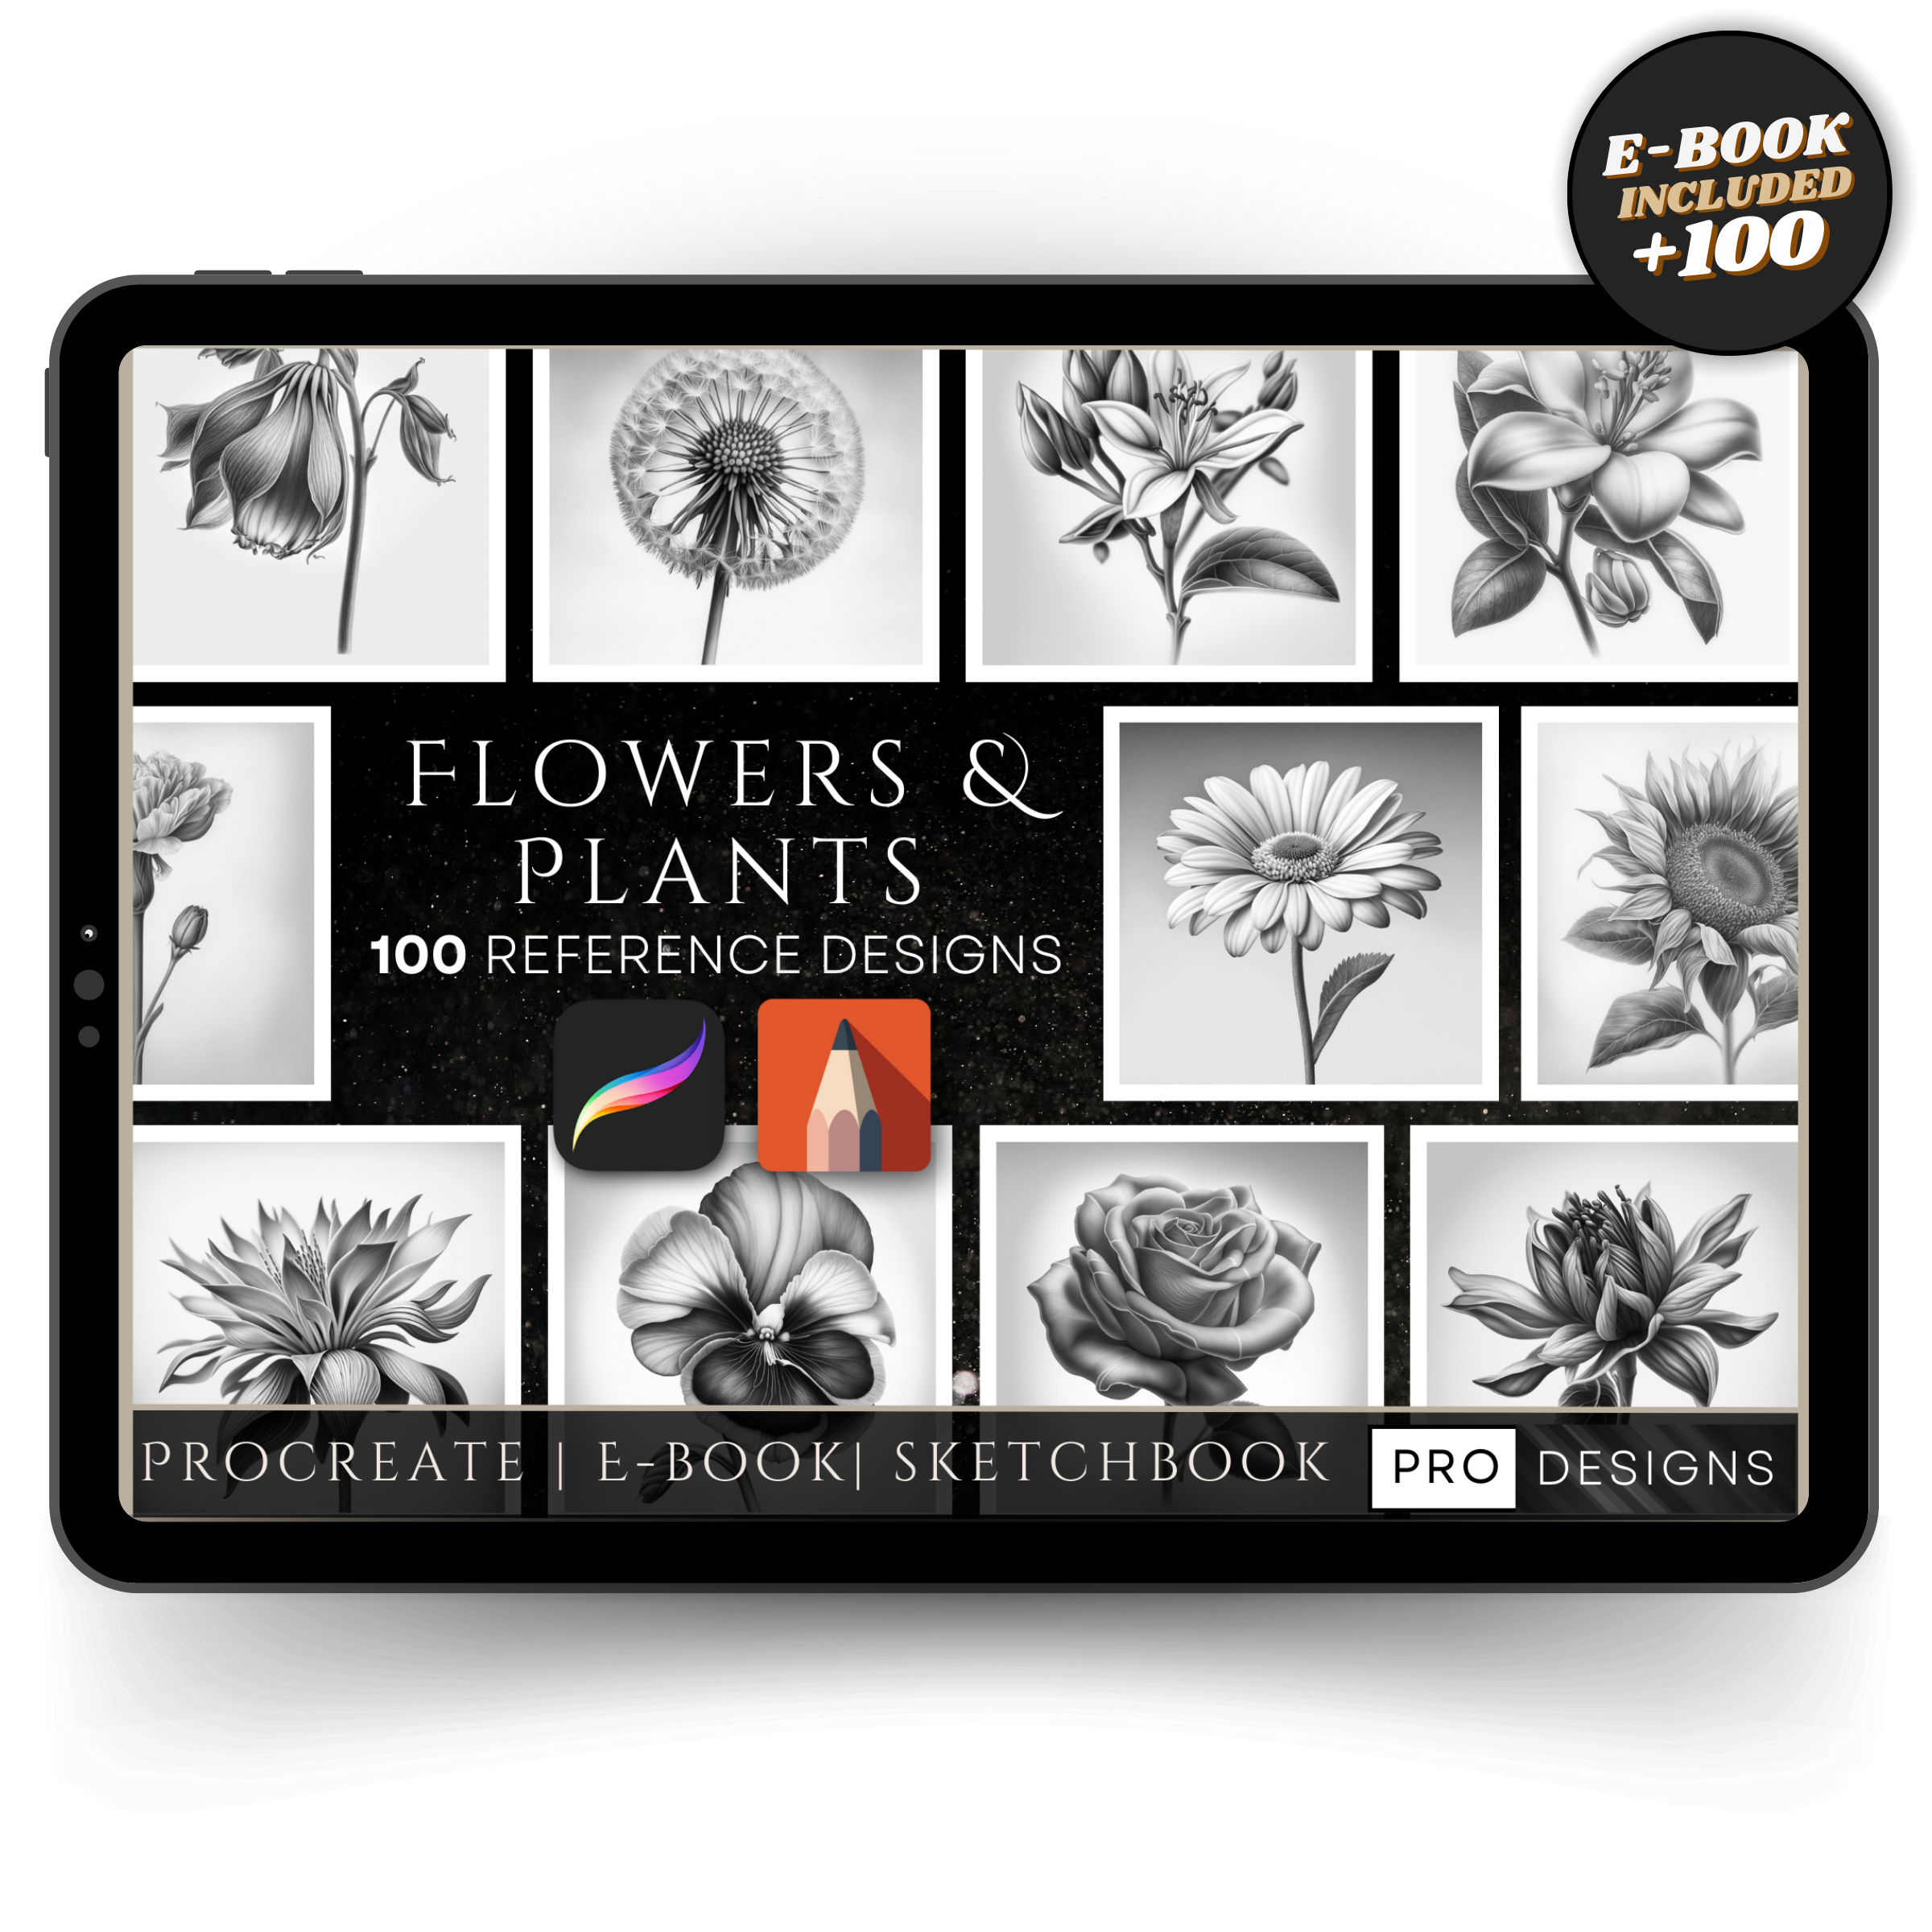 "Blossoming Artistry" - The Flowers and Plants Collection